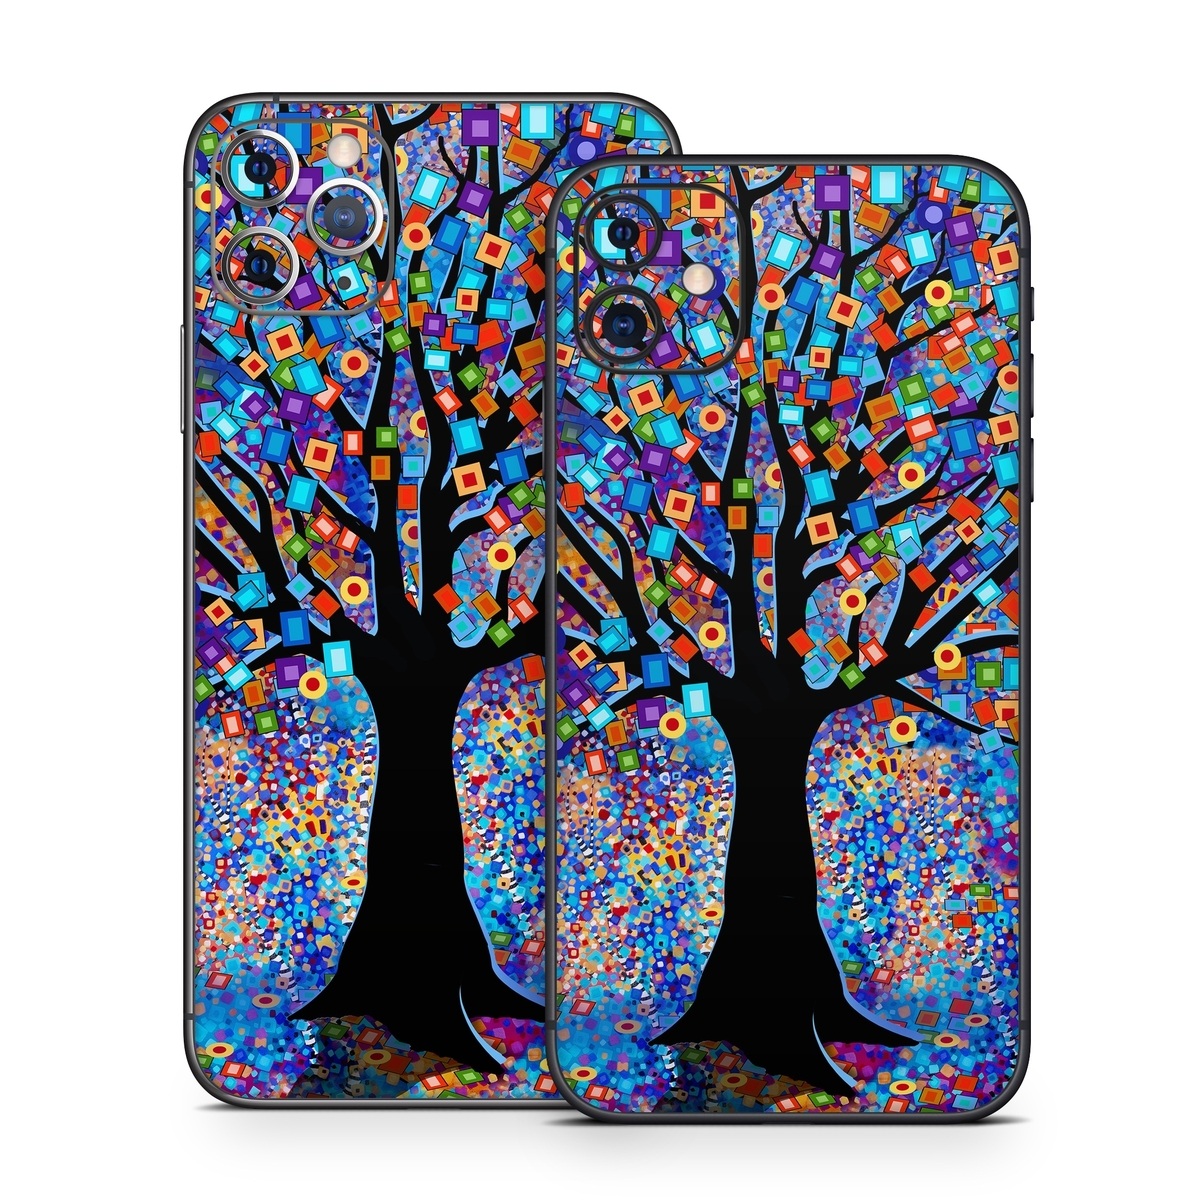 iPhone 11 Series Skin design of Psychedelic art, Modern art, Art, with black, blue, red, orange, yellow, green, purple colors